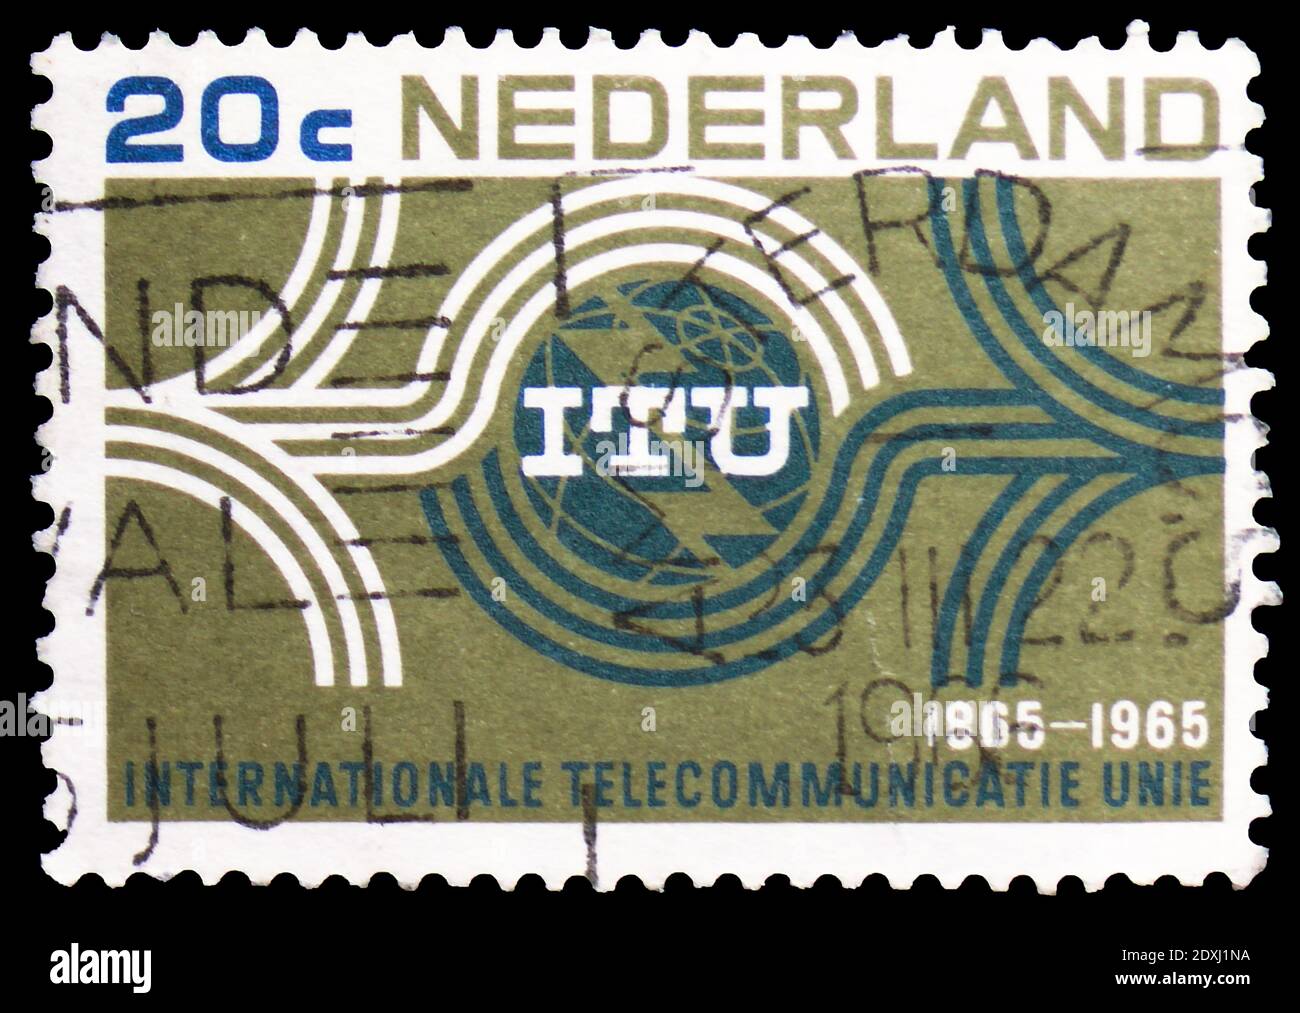 MOSCOW, RUSSIA - MARCH 23, 2019: Postage stamp printed in Netherlands shows International Telecommunications Union, I.T.U., Centary serie, circa 1965 Stock Photo